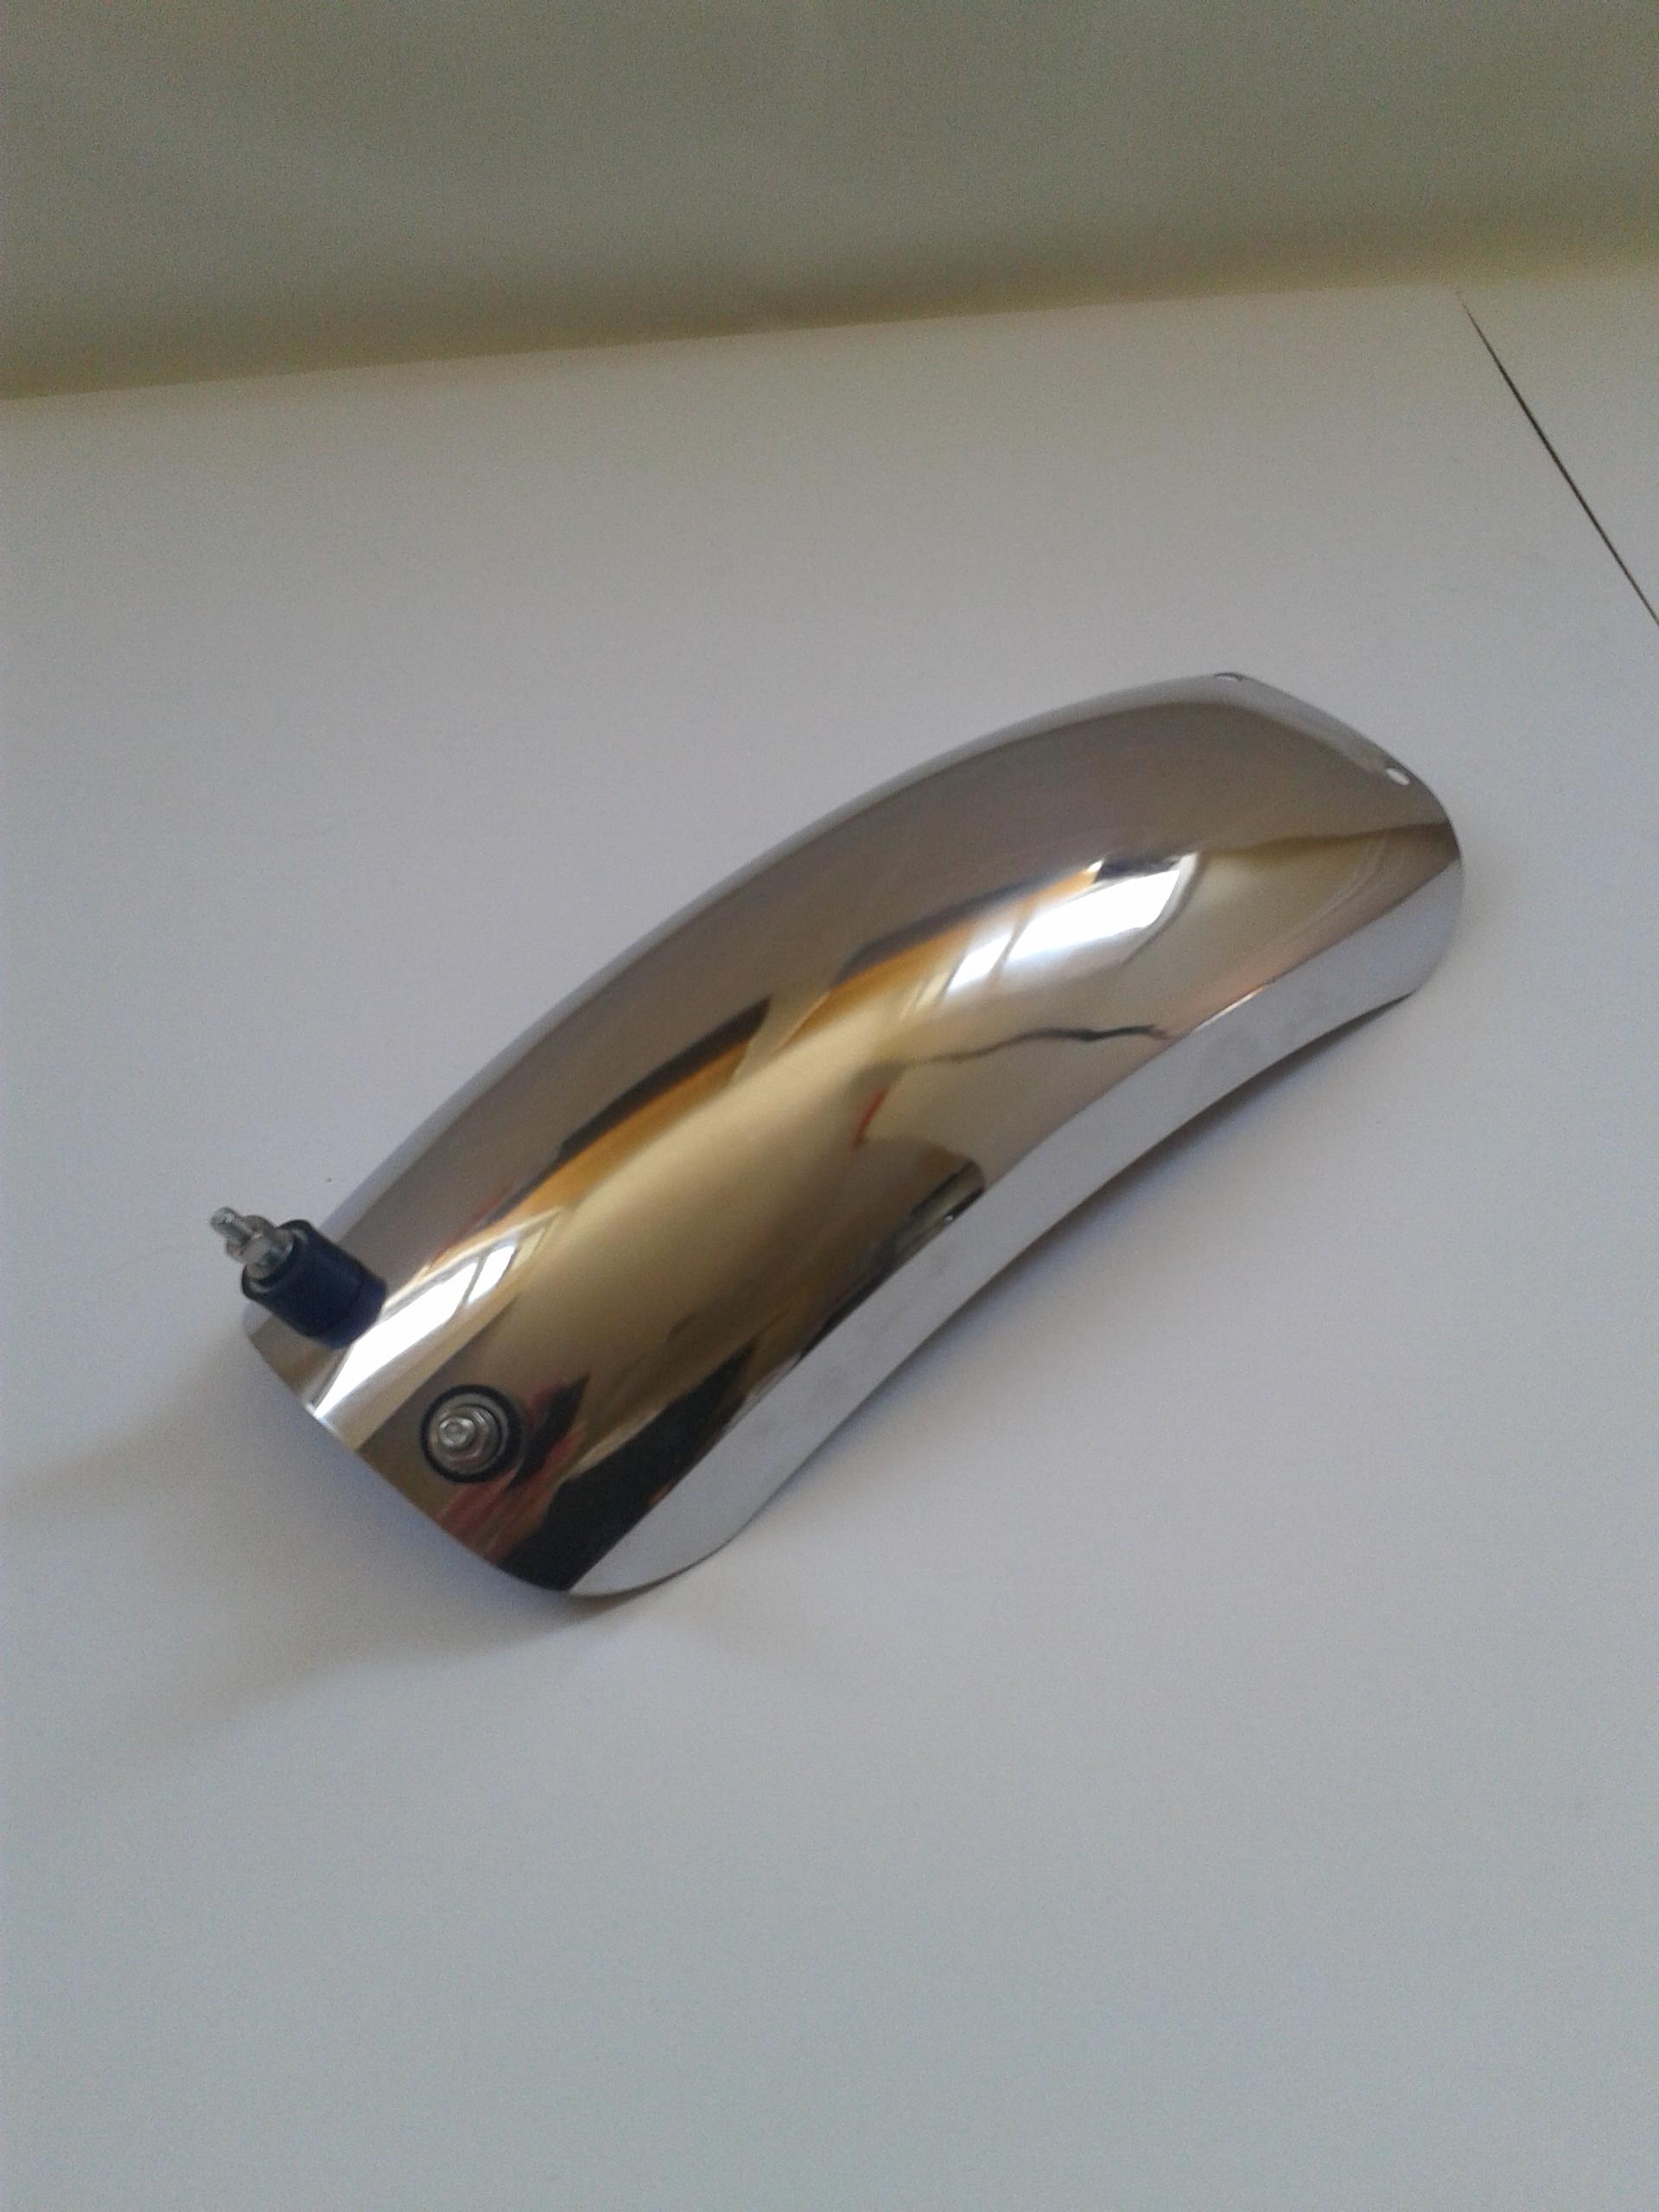 FlatRacer BMW Airhead Boxer short rear stainless steel mudguard